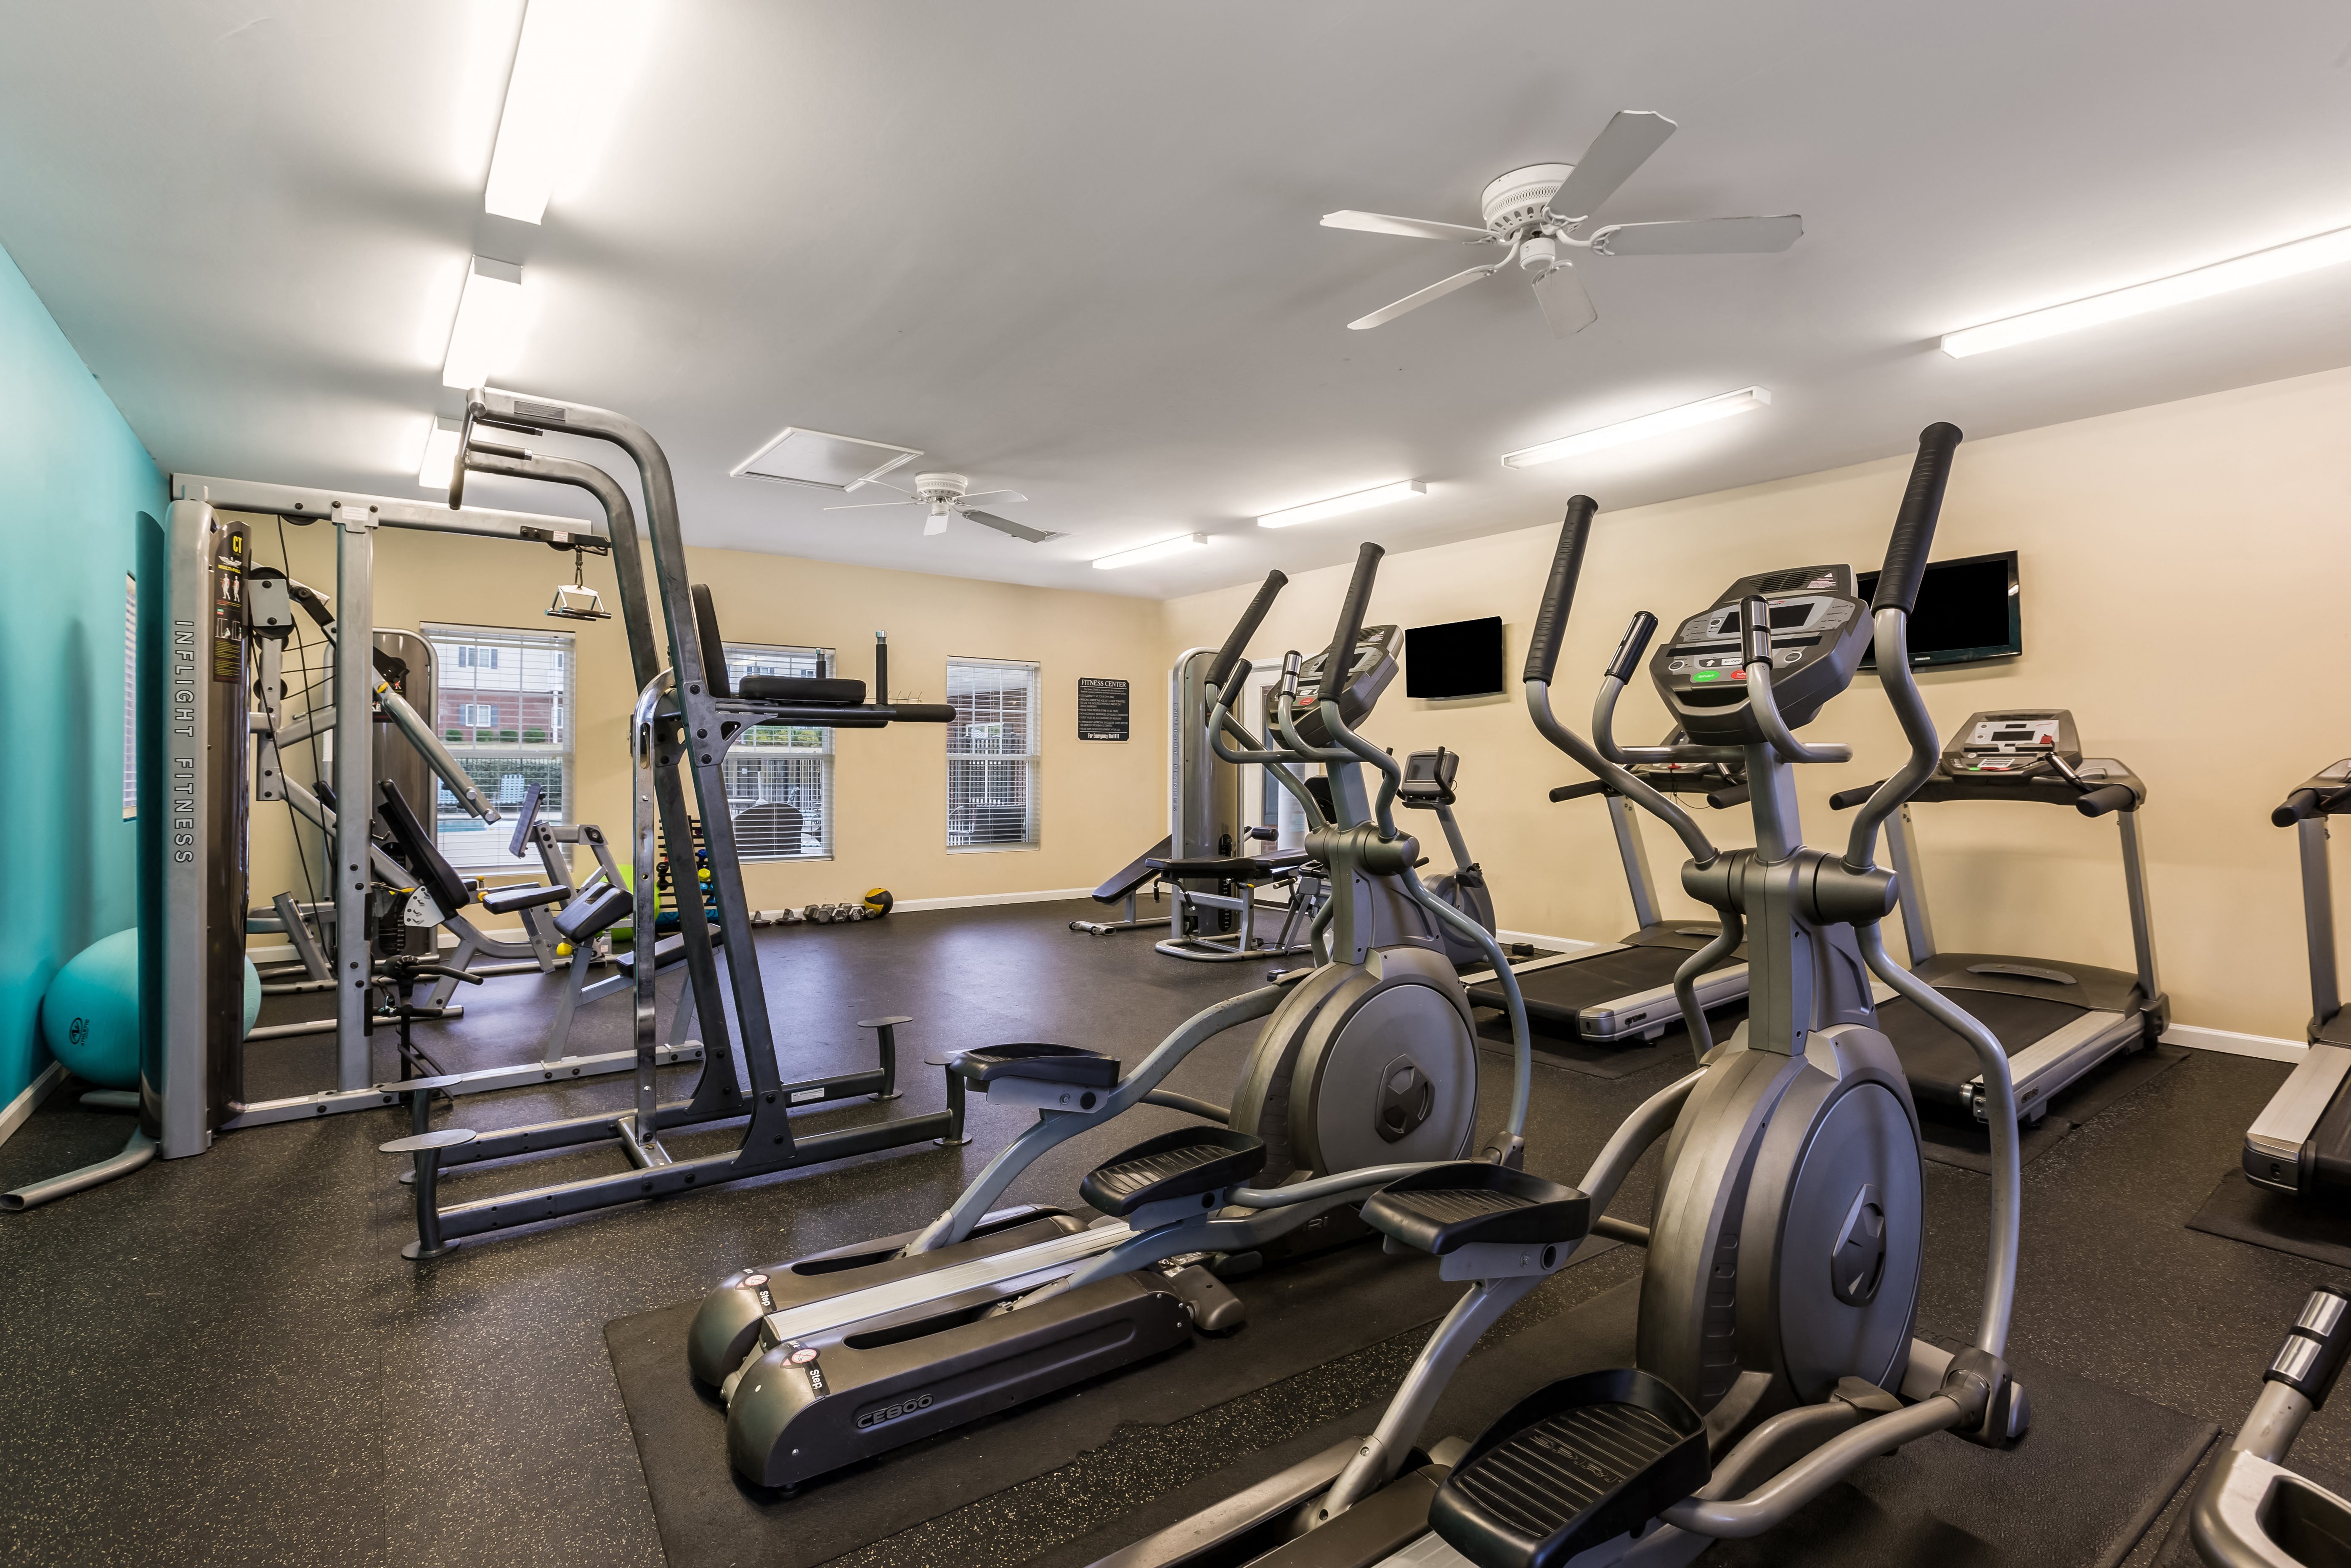 Fitness center at the Summit on 401